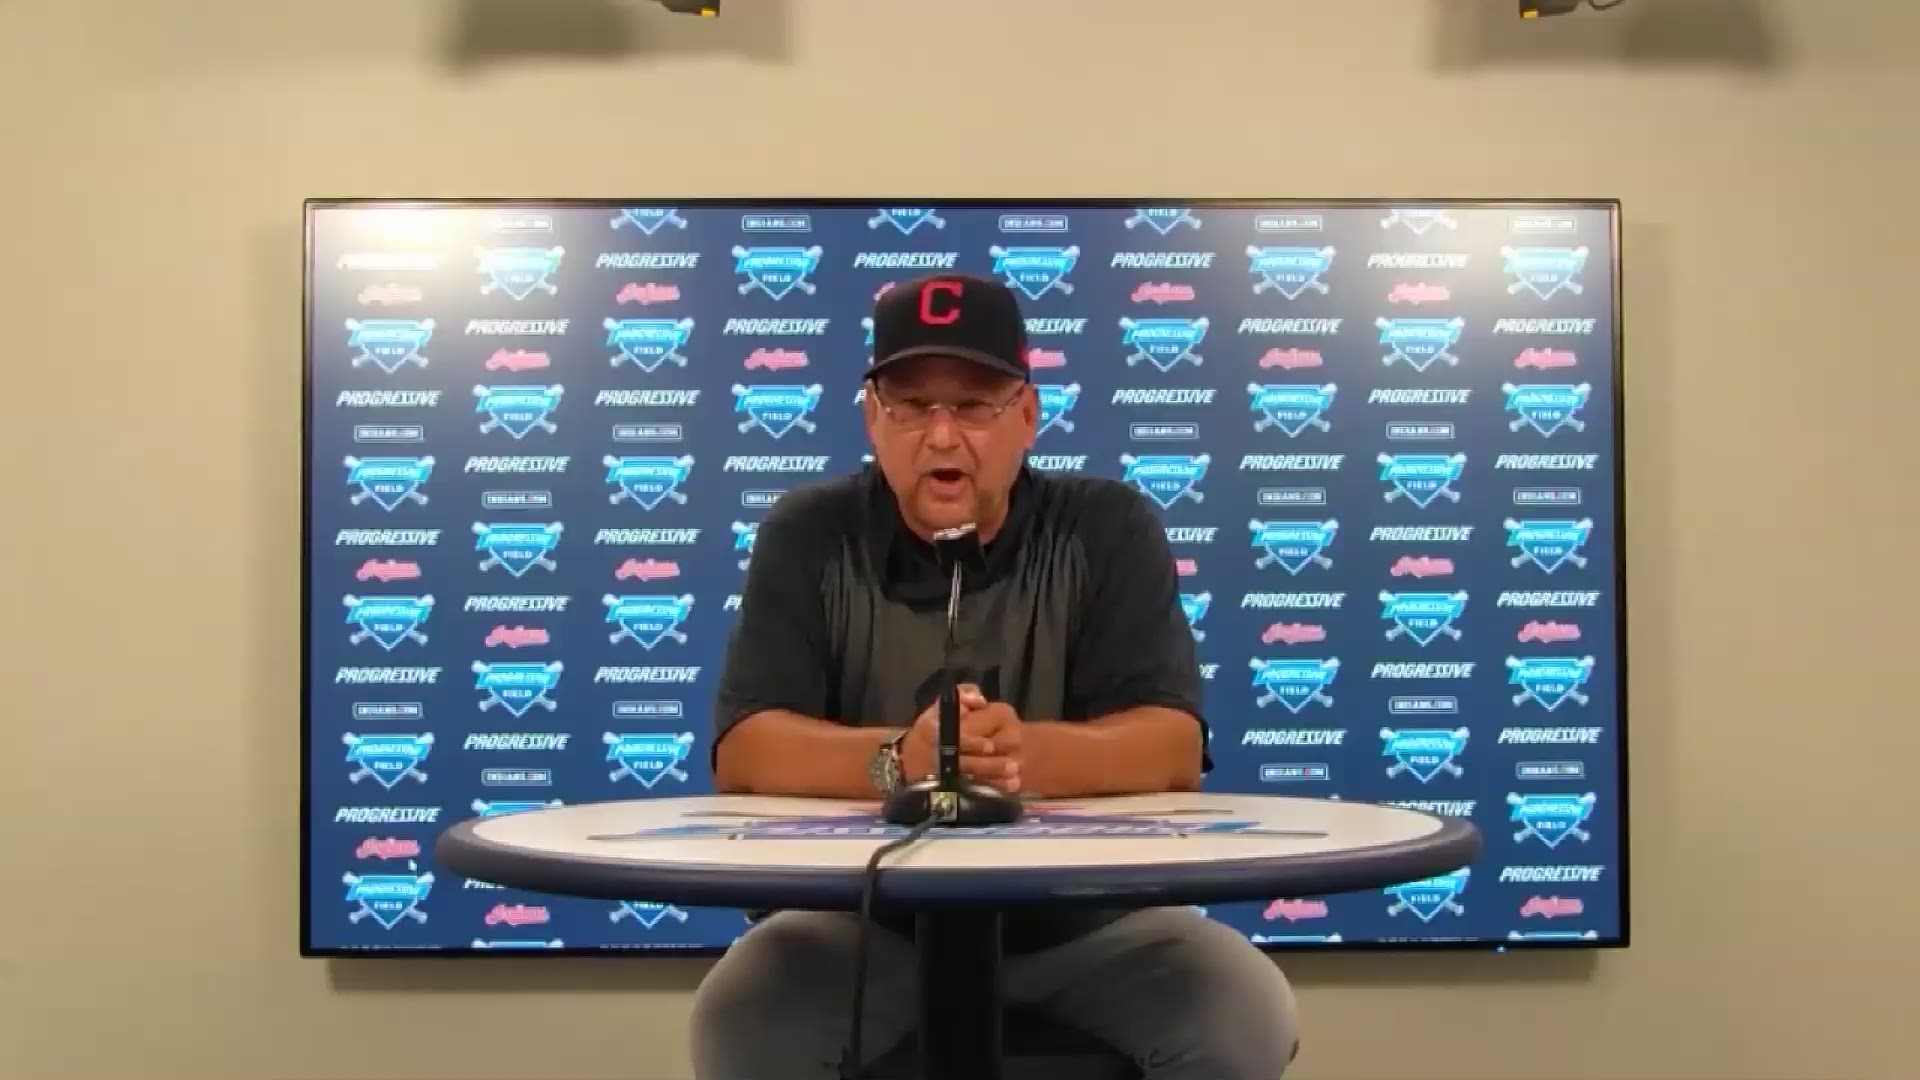 The Indians season opener will be on Friday, July 24 at 7:10 p.m.  The game can be seen on WKYC - TV channel 3.